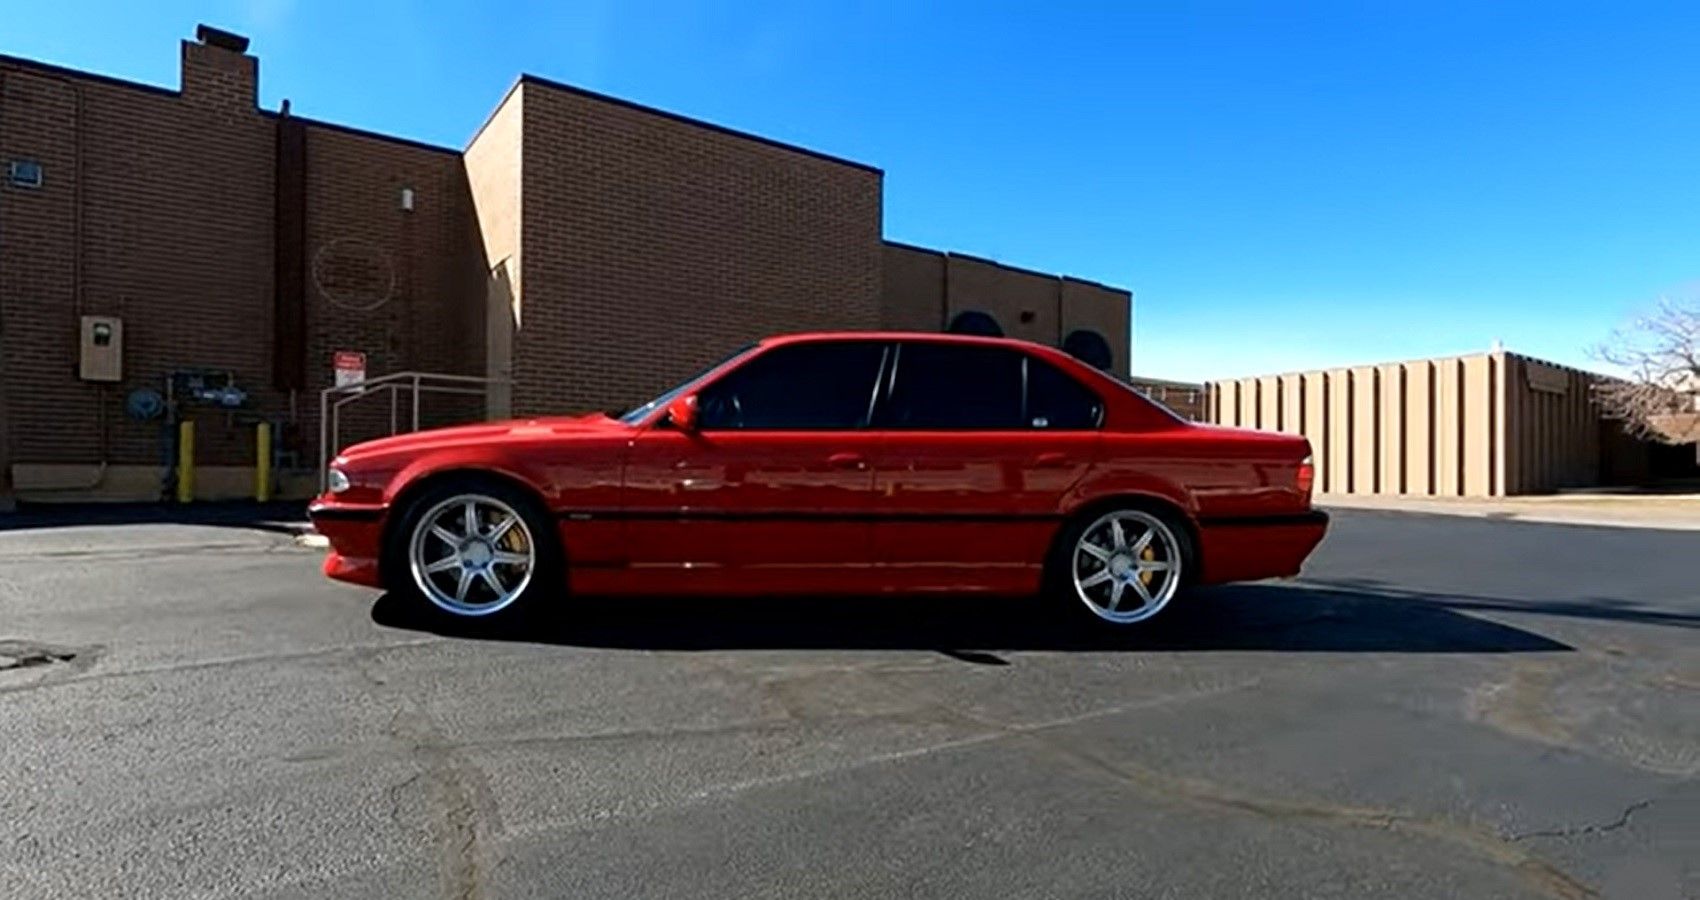 1995-2002 BMW E38 7 Series: The Last of the Low and Wide?